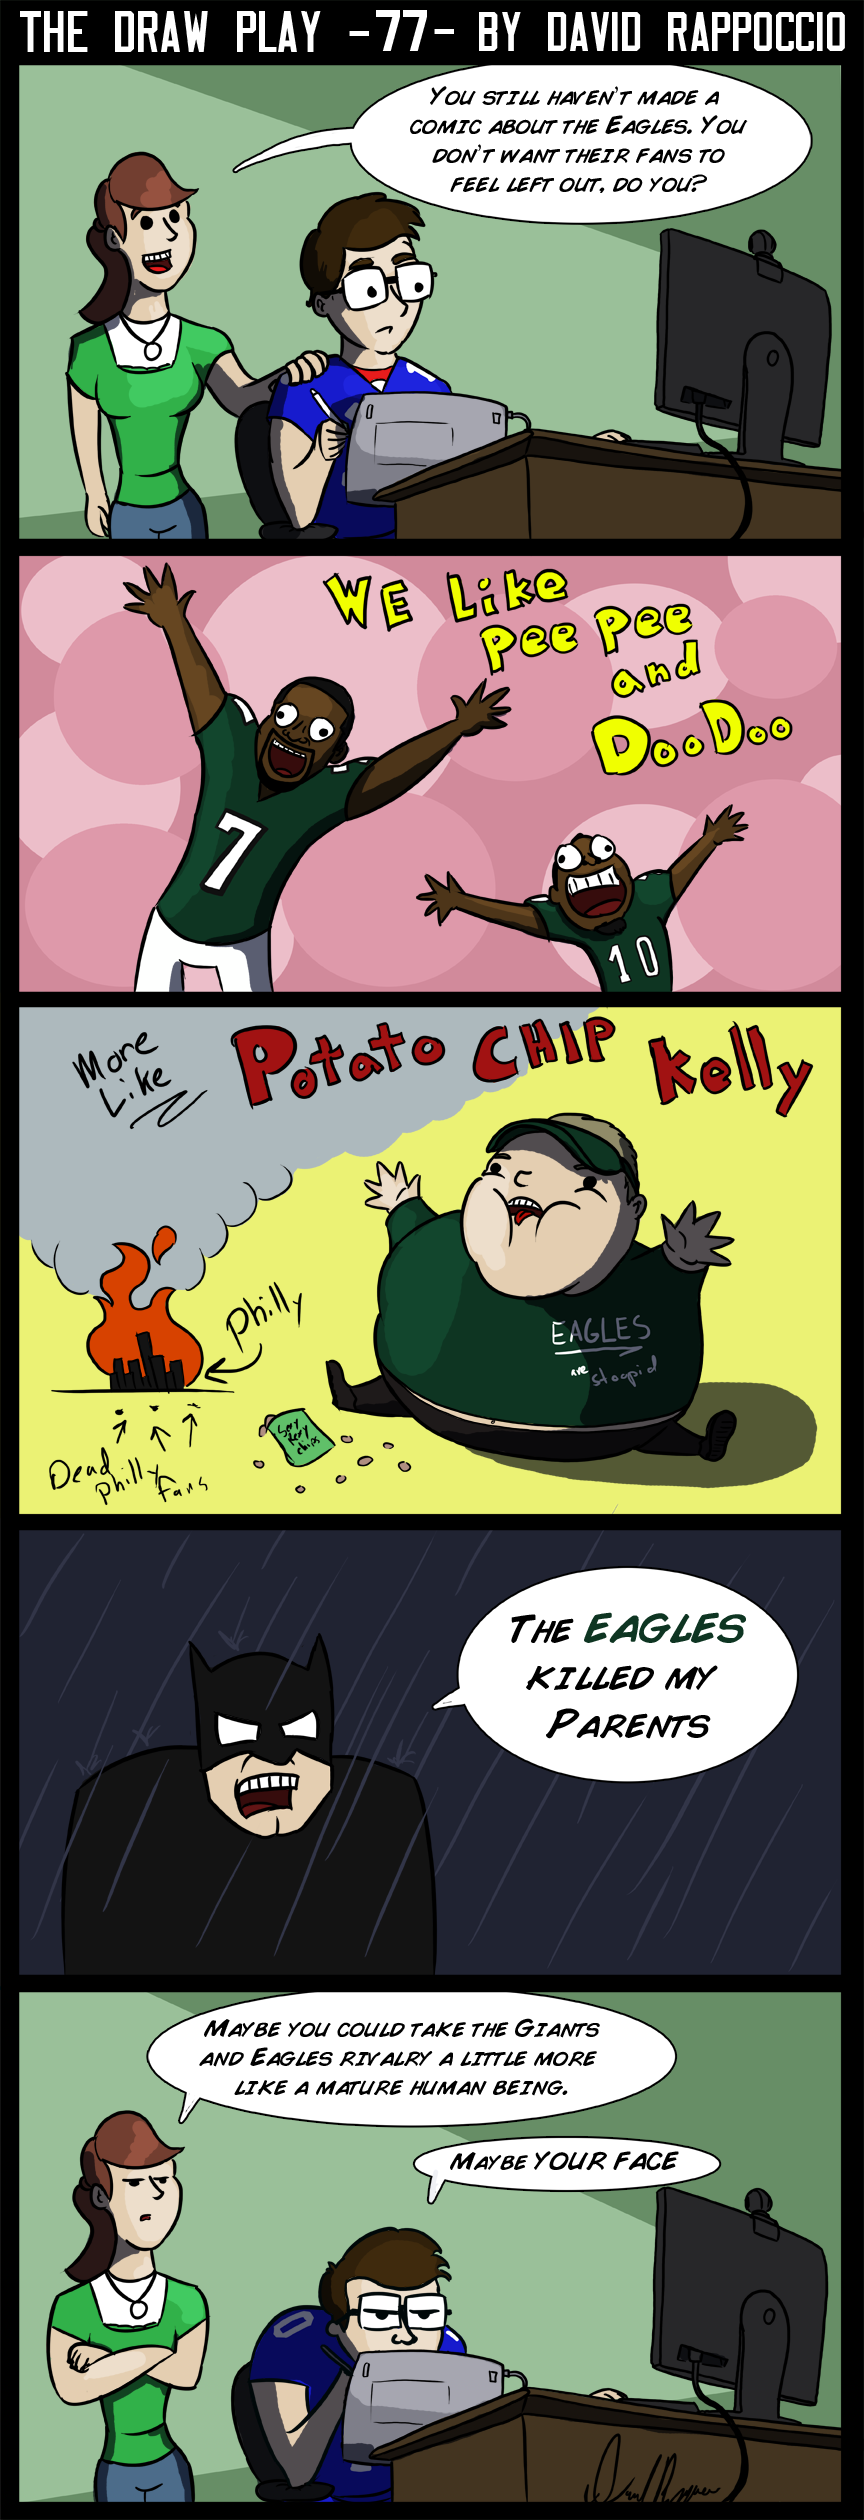 In other completely unbiased opinions, The Draw Play is the best comic ever